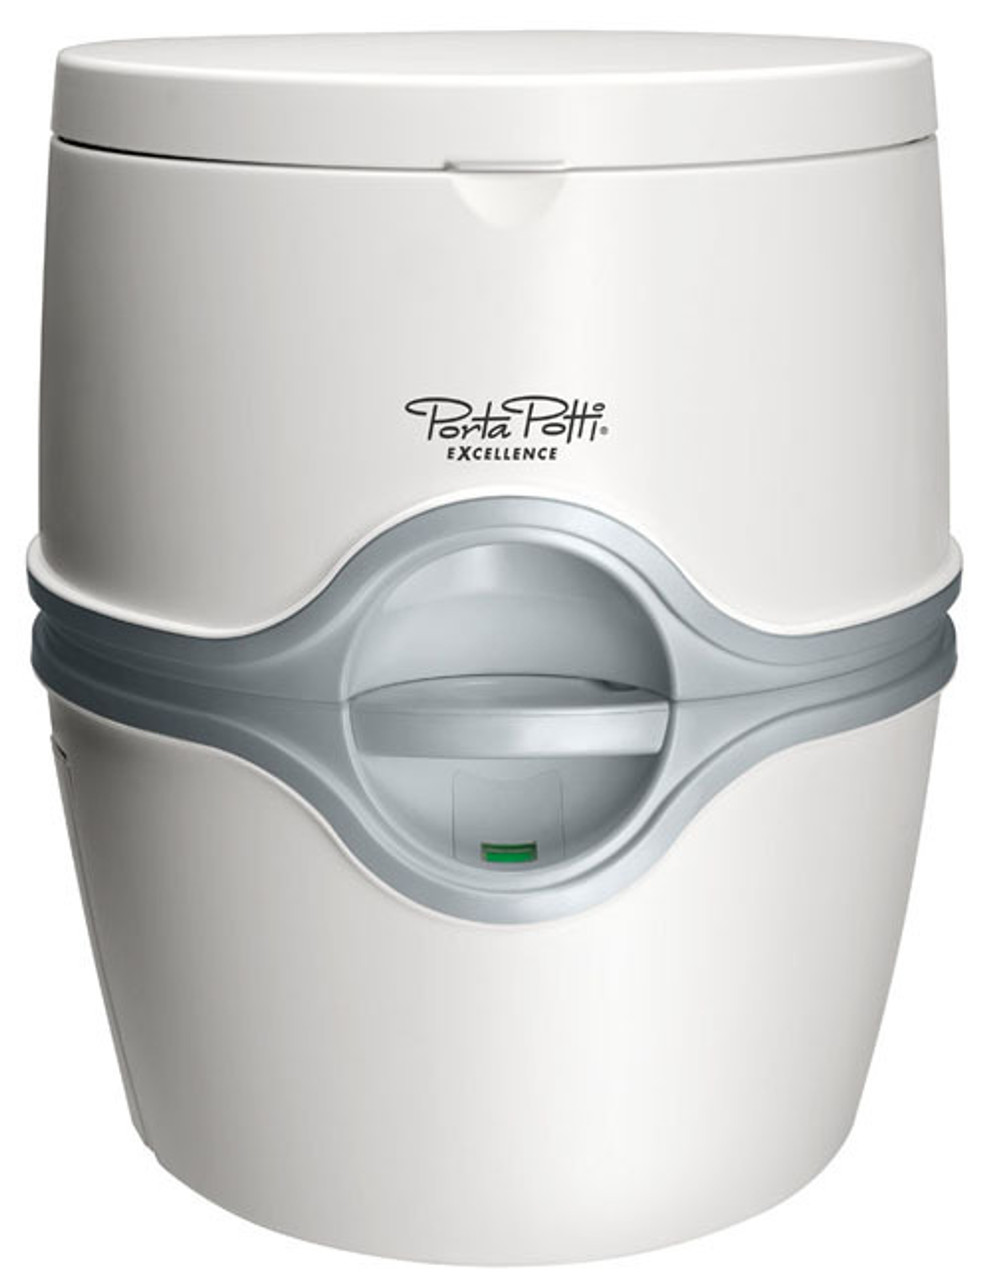 Thetford Porta Potti Excellence with either manual or electric flush